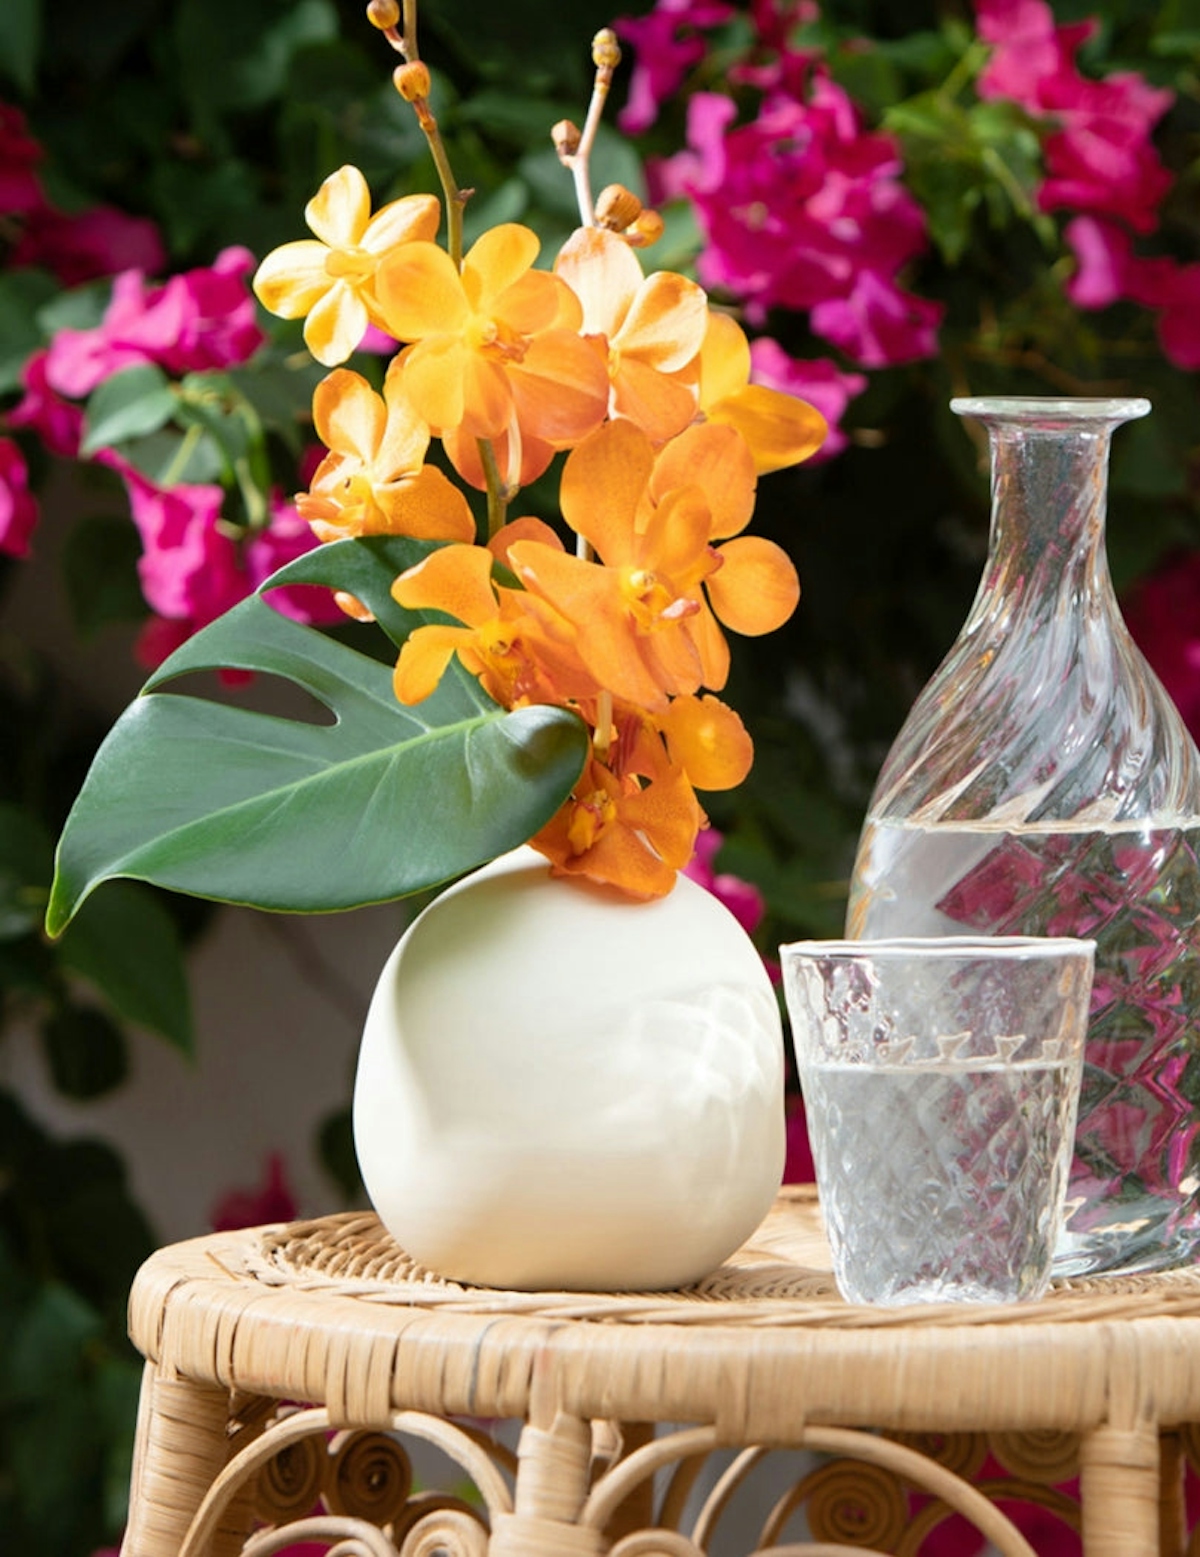 How To Choose The Right Vase Shape For Your Flowers - Bud Vase - LuxDeco.com Style Guide